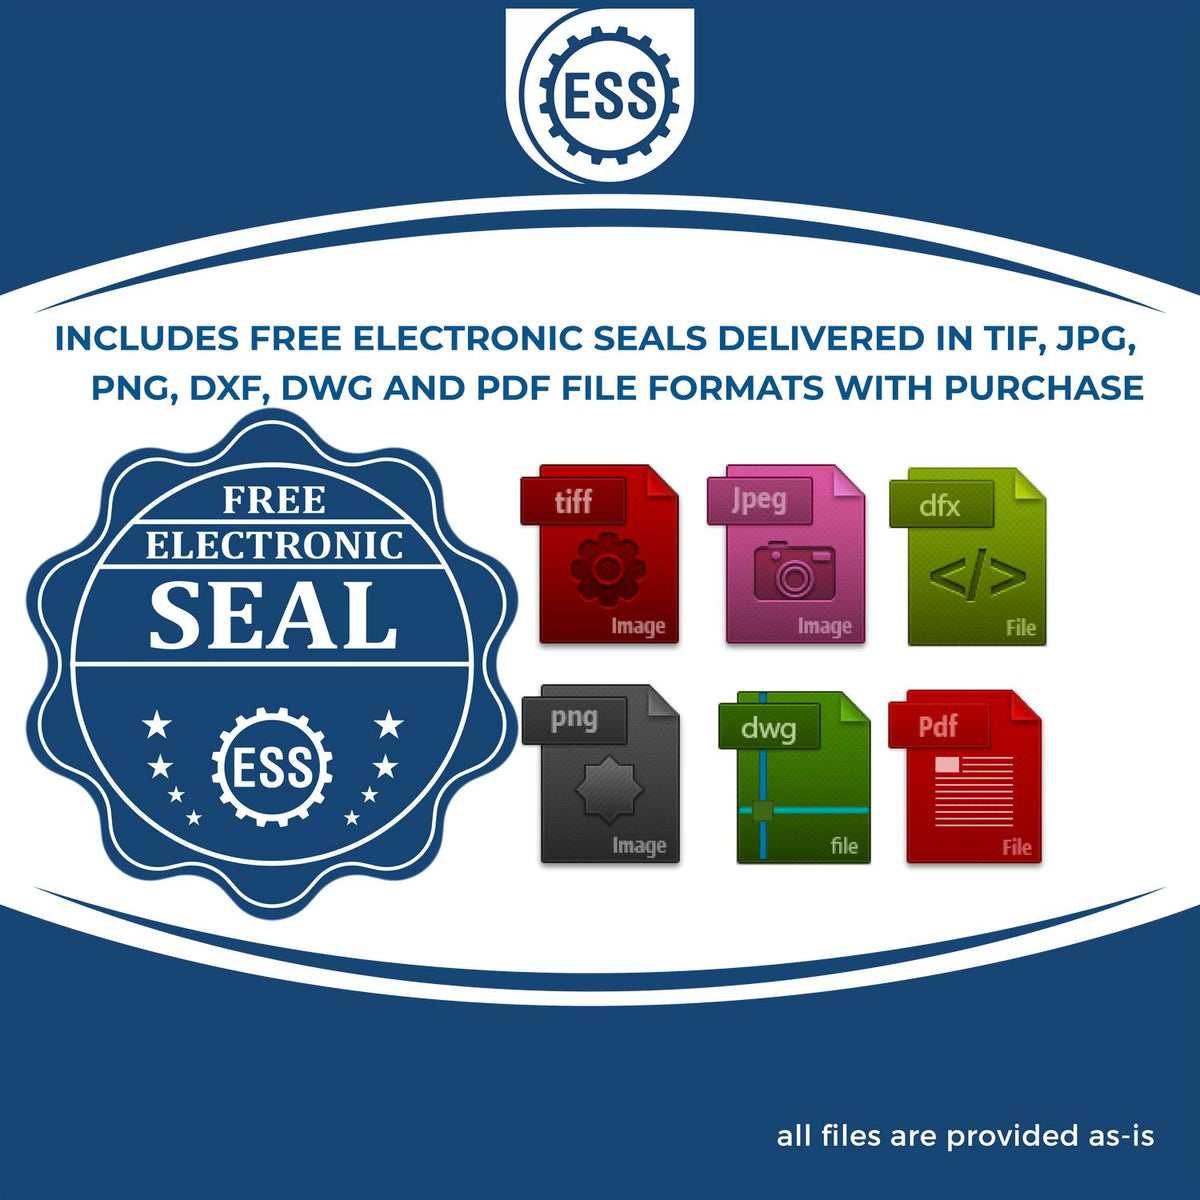 An infographic for the free electronic seal for the Slim Pre-Inked Colorado Architect Seal Stamp illustrating the different file type icons such as DXF, DWG, TIF, JPG and PNG.